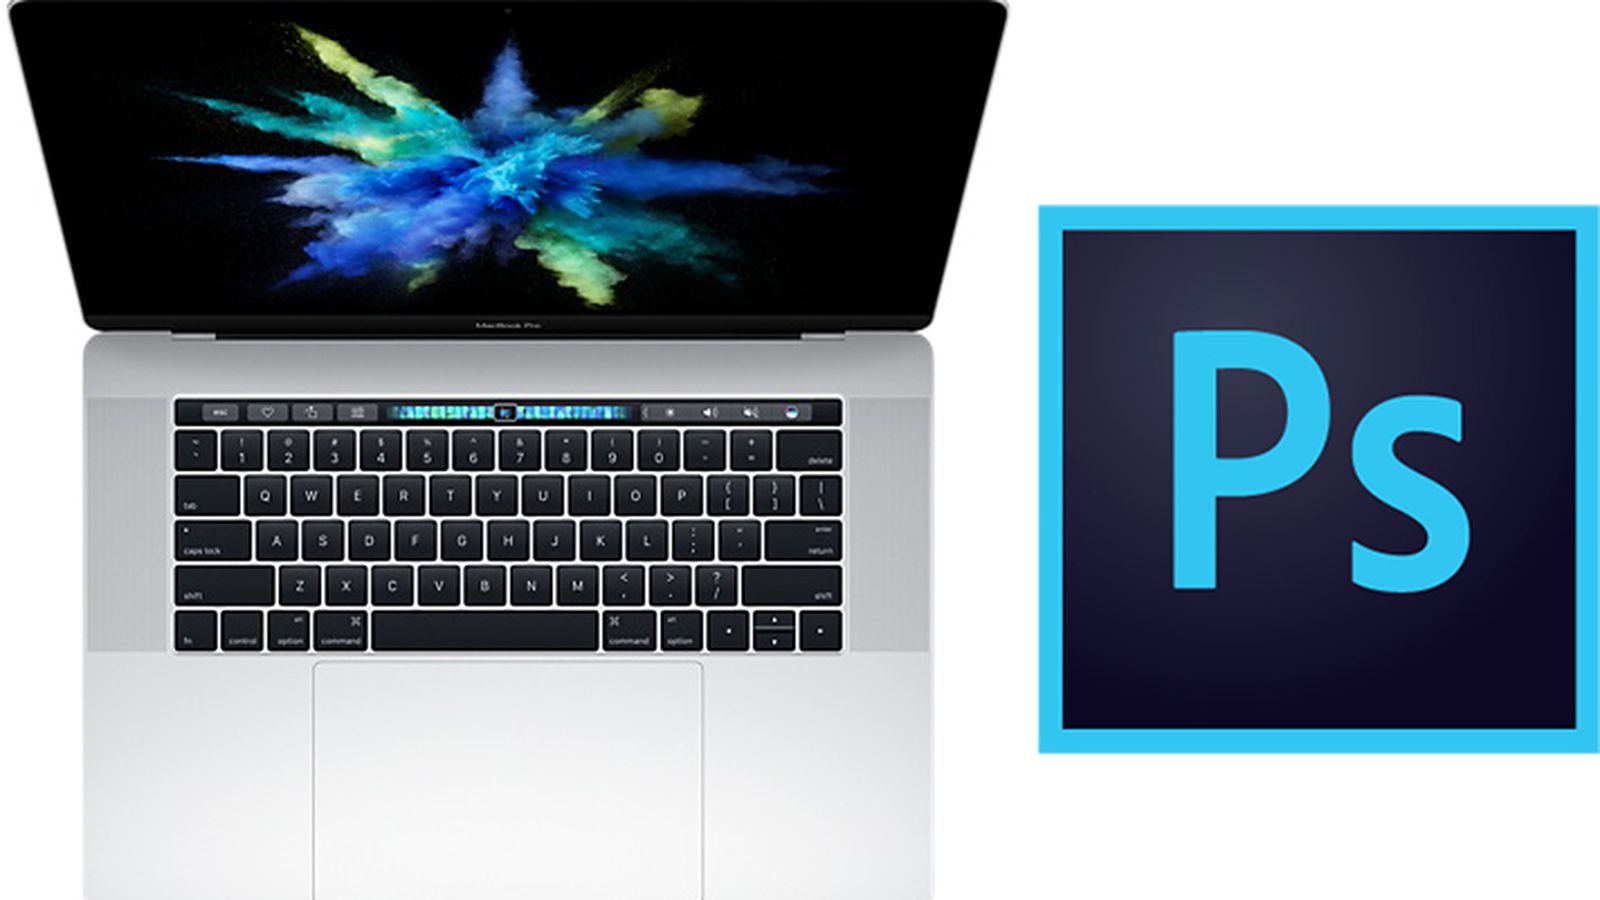 photoshop for mac with toch bar